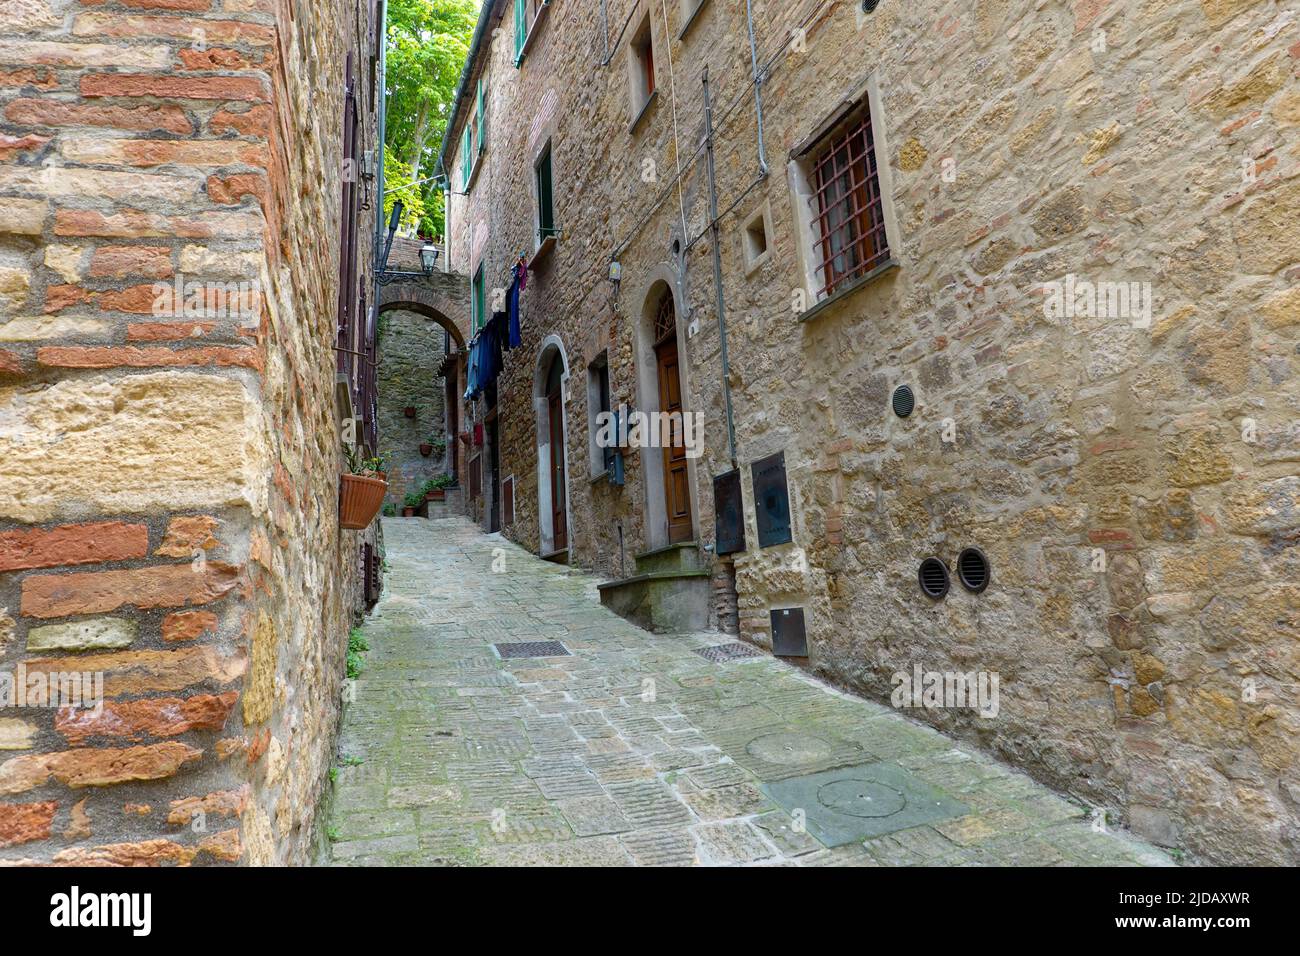 Looking down Vicolo Mozzo, a residential alleyway in the hill town of Volterra, Province of Pisa, Italy. Stock Photo